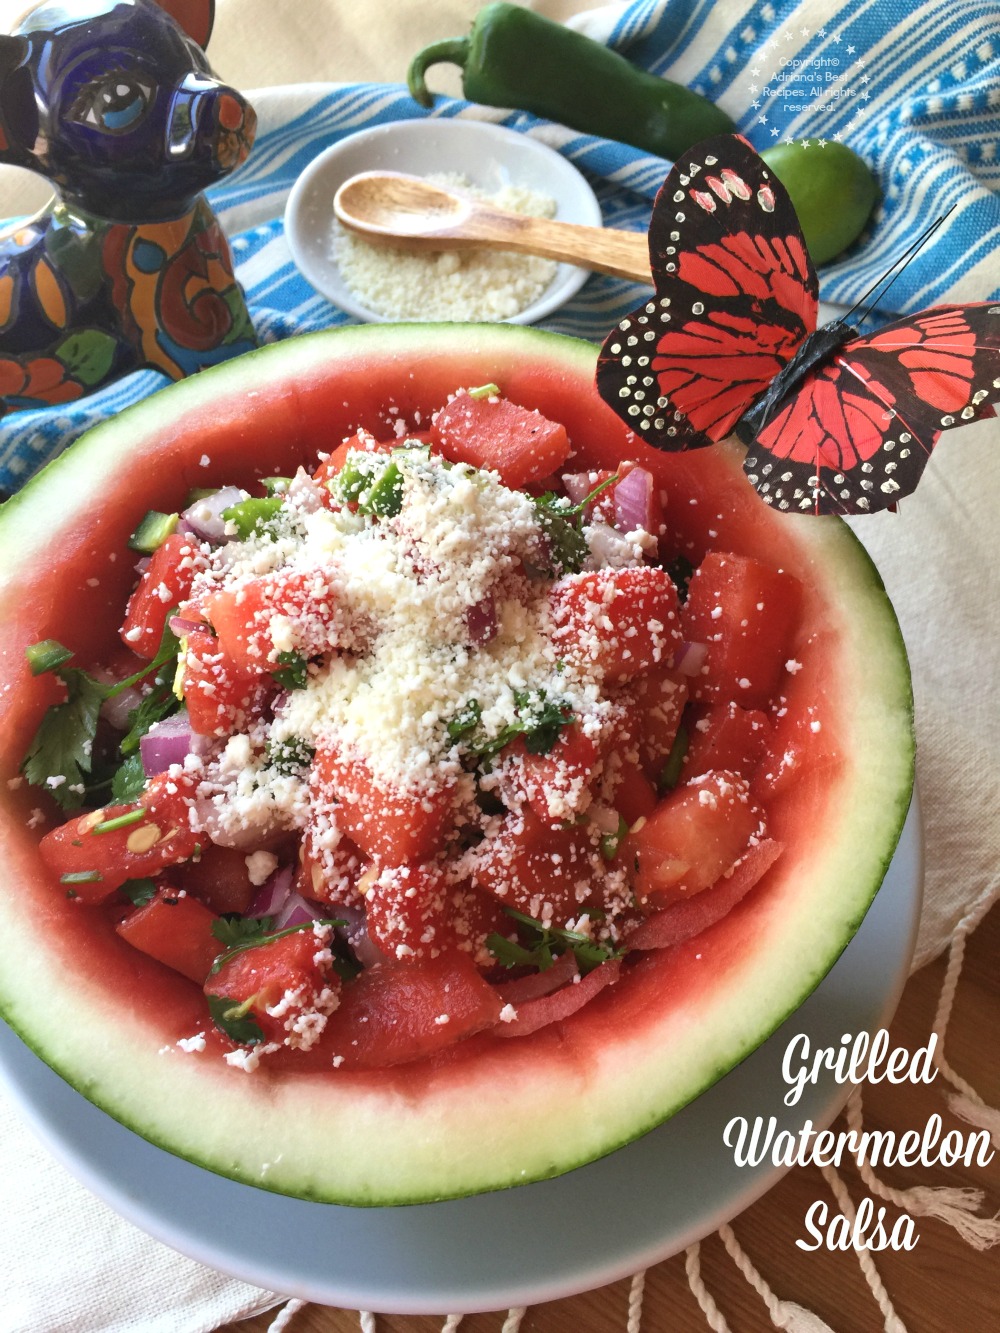 Grilled watermelon salsa made with jalapeño peppers, purple onions, cilantro, lime juice and finished with grated cotija cheese